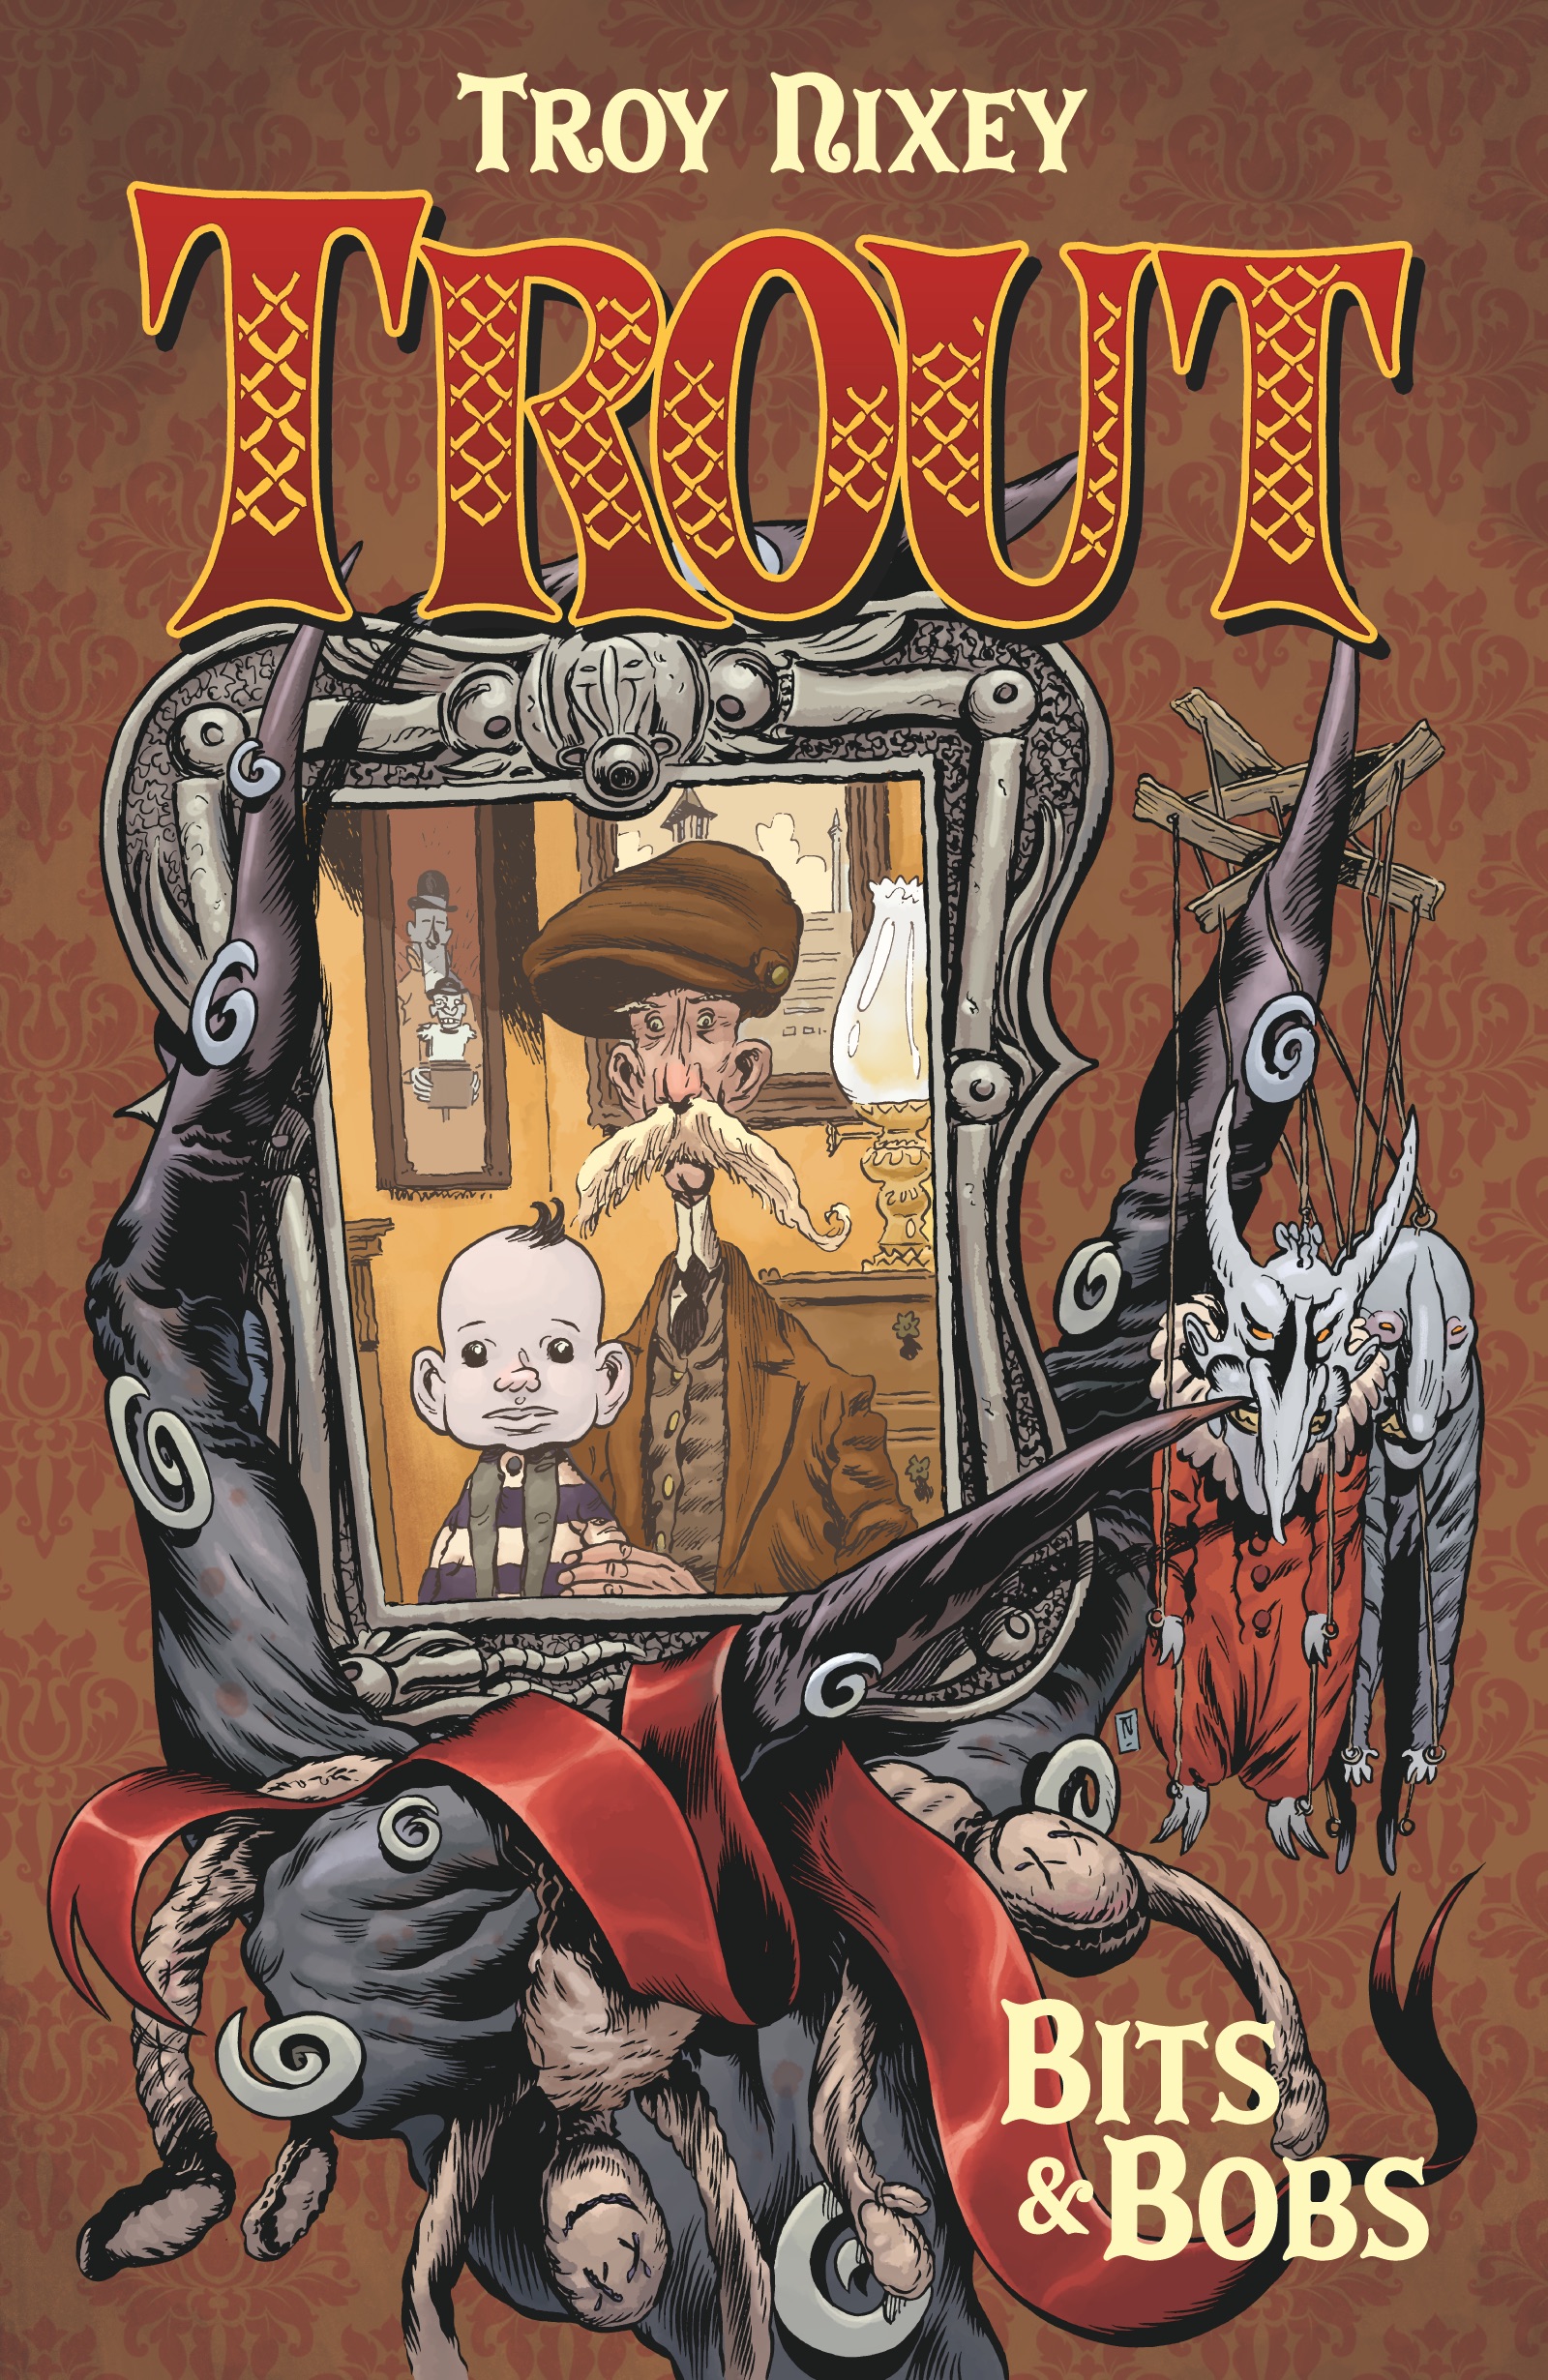 [EXCLUSIVE] Horror and humor combines in Troy Nixey's 'Trout Collection'